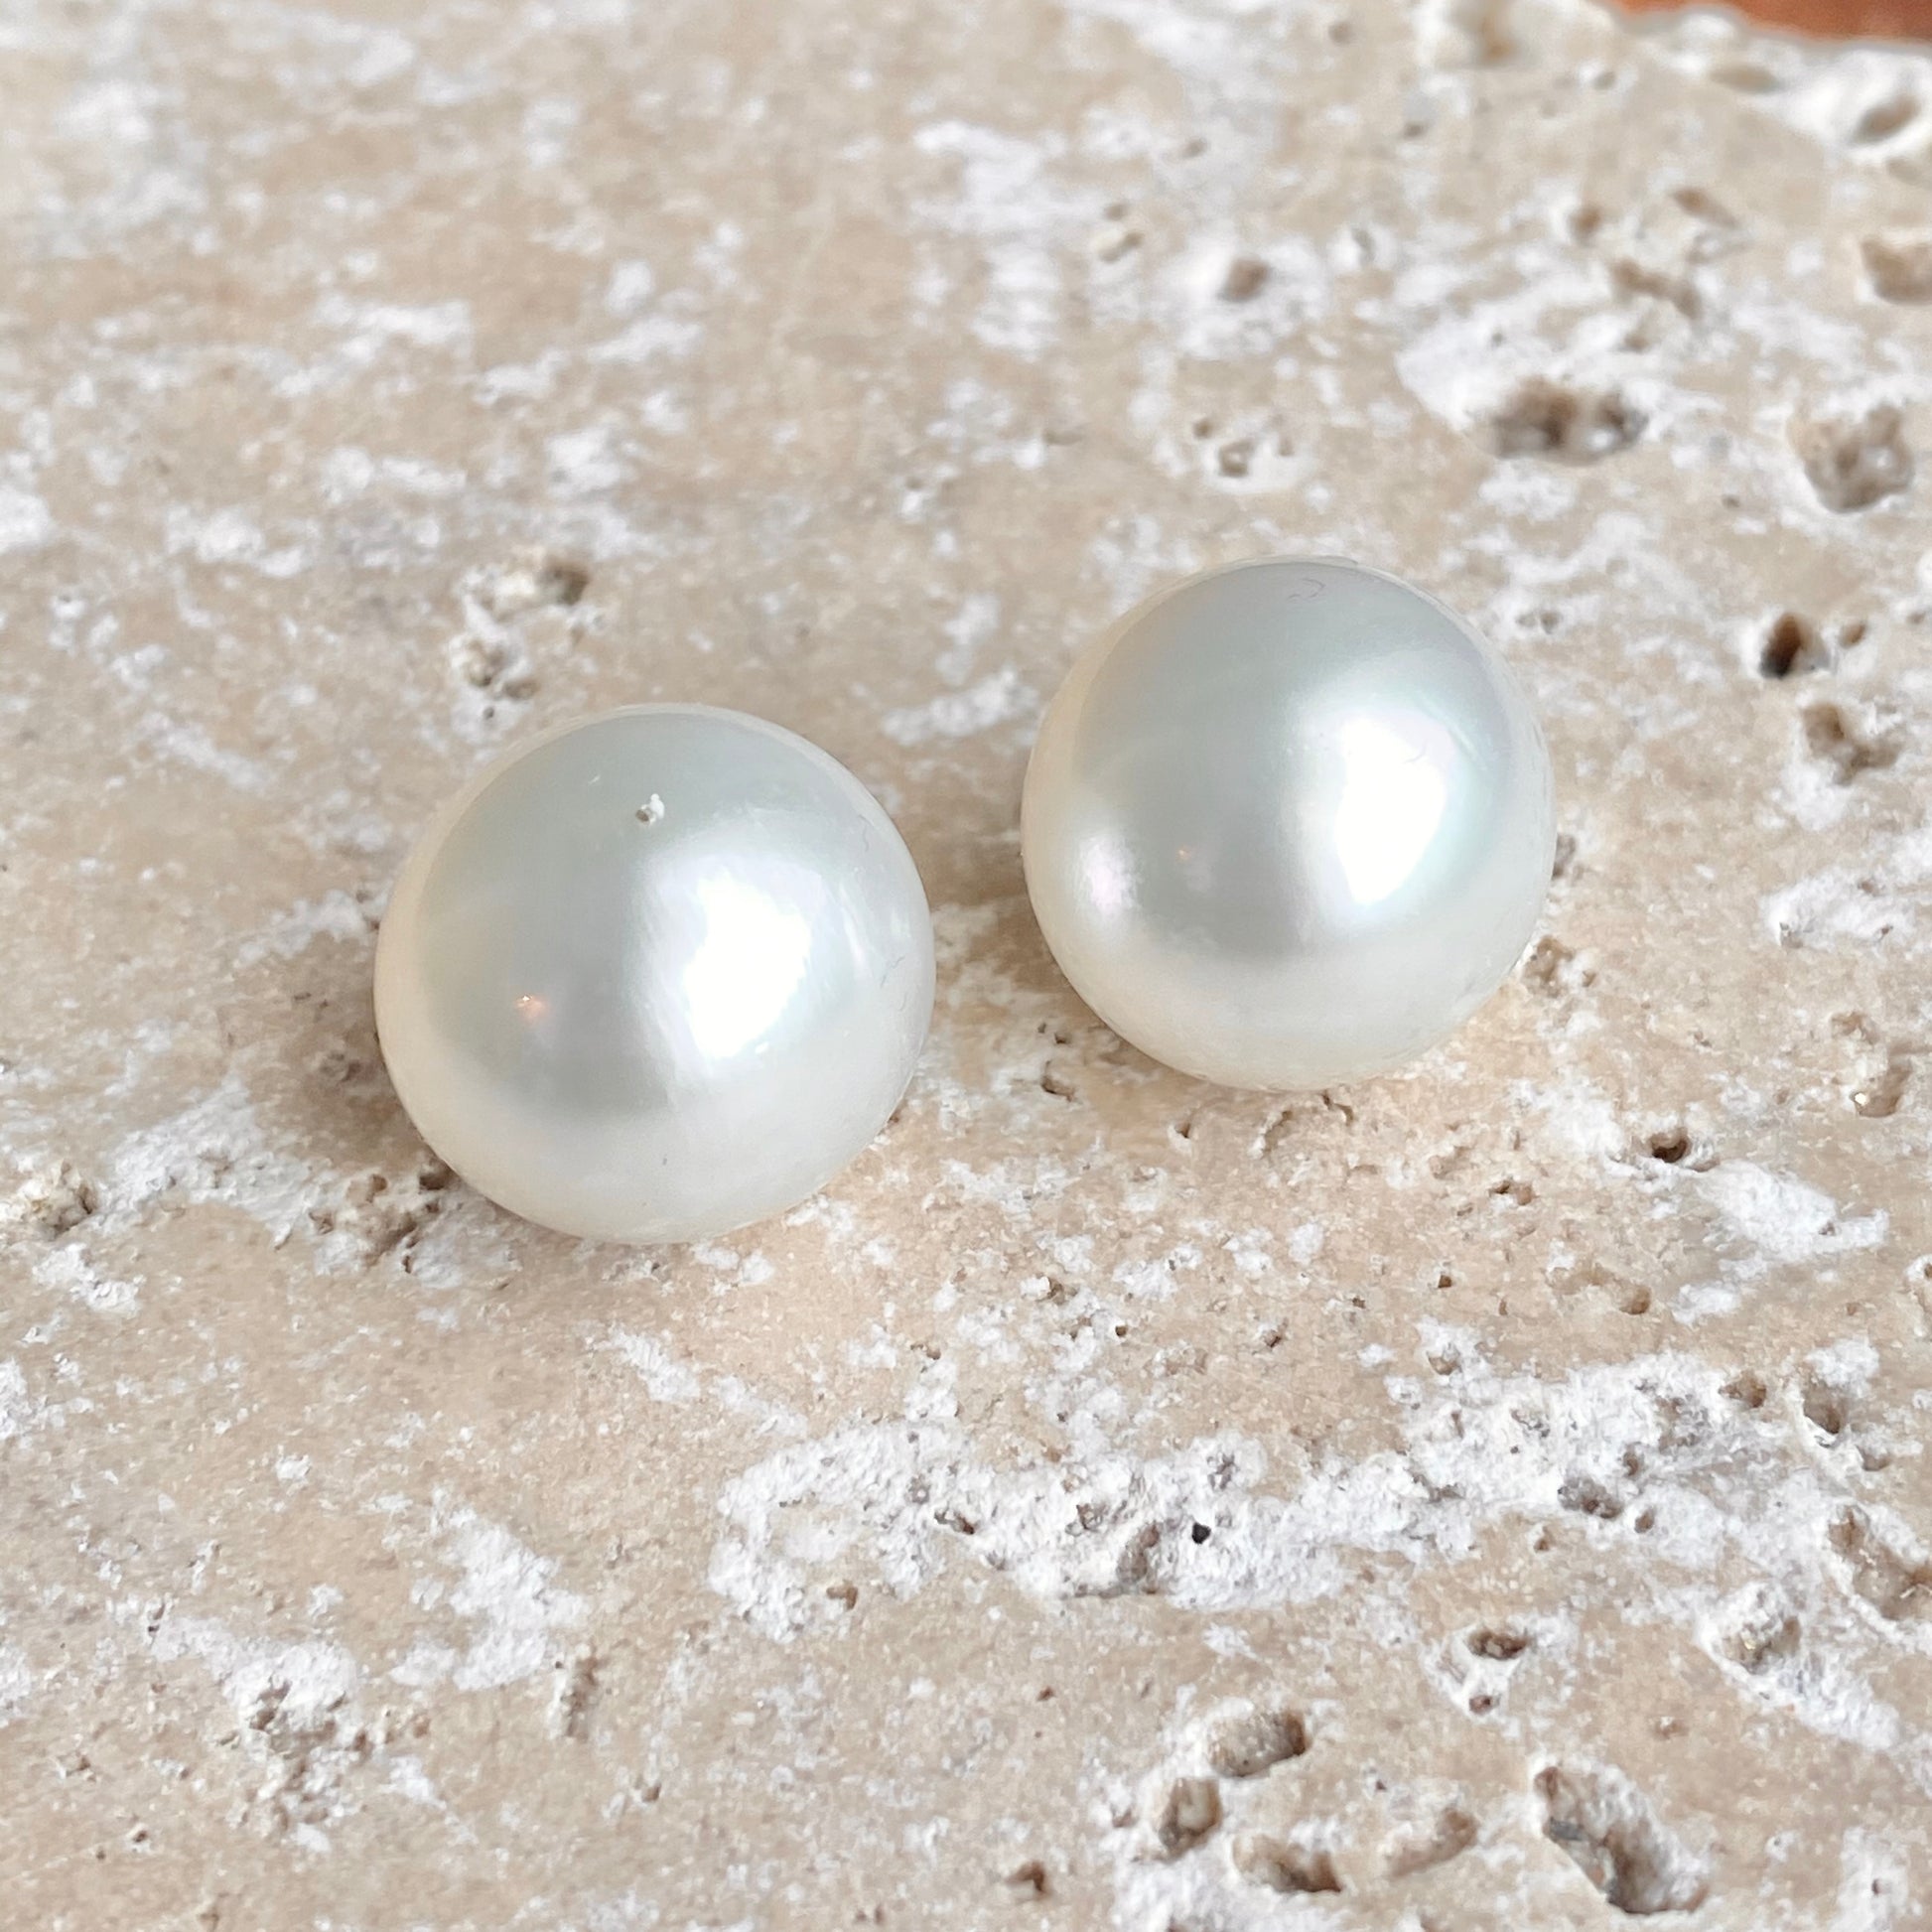 Genuine Cultured Paspaley South Sea Loose Pearl Pair "Fashion" Quality 14mm, Genuine Cultured Paspaley South Sea Loose Pearl Pair "Fashion" Quality 14mm - Legacy Saint Jewelry